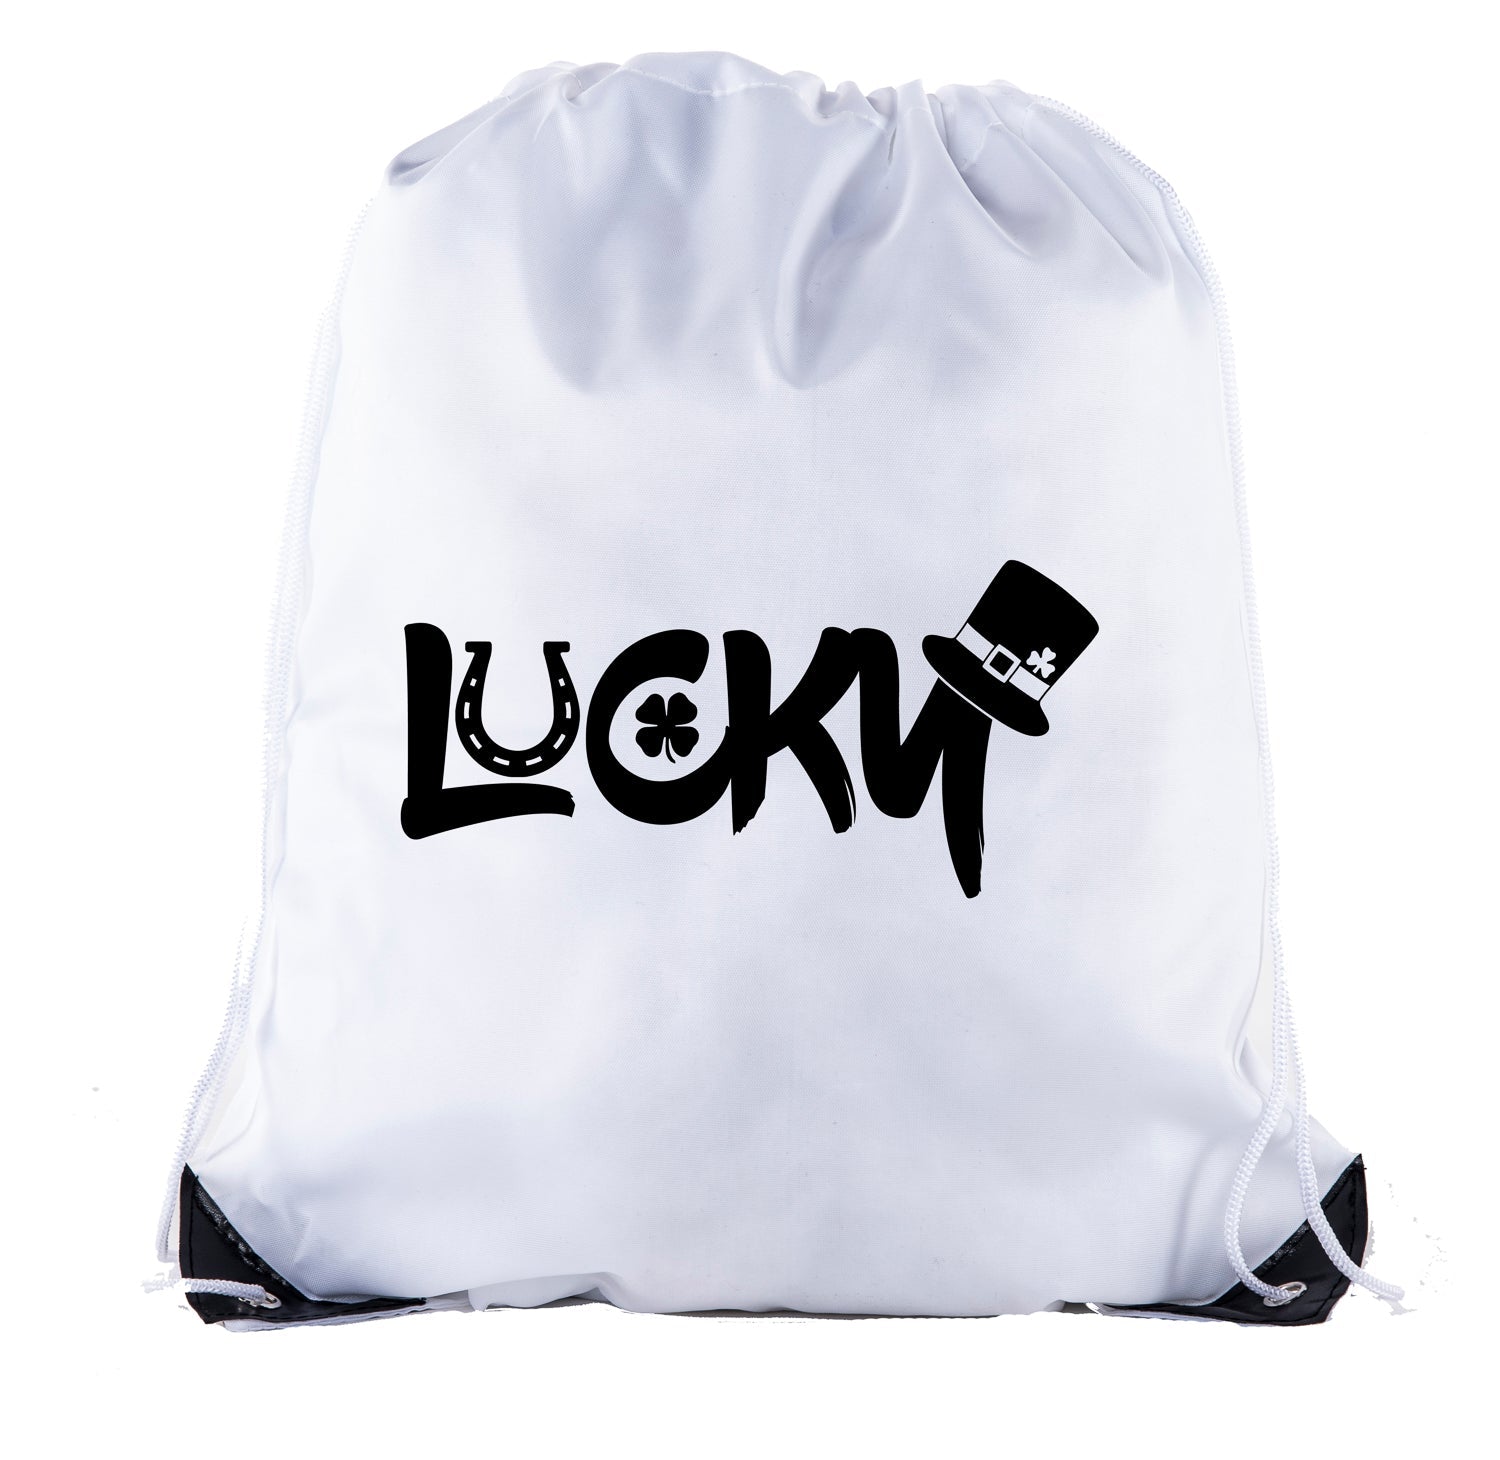 Lucky St. Patrick's Day Polyester Drawstring Bag - Mato & Hash